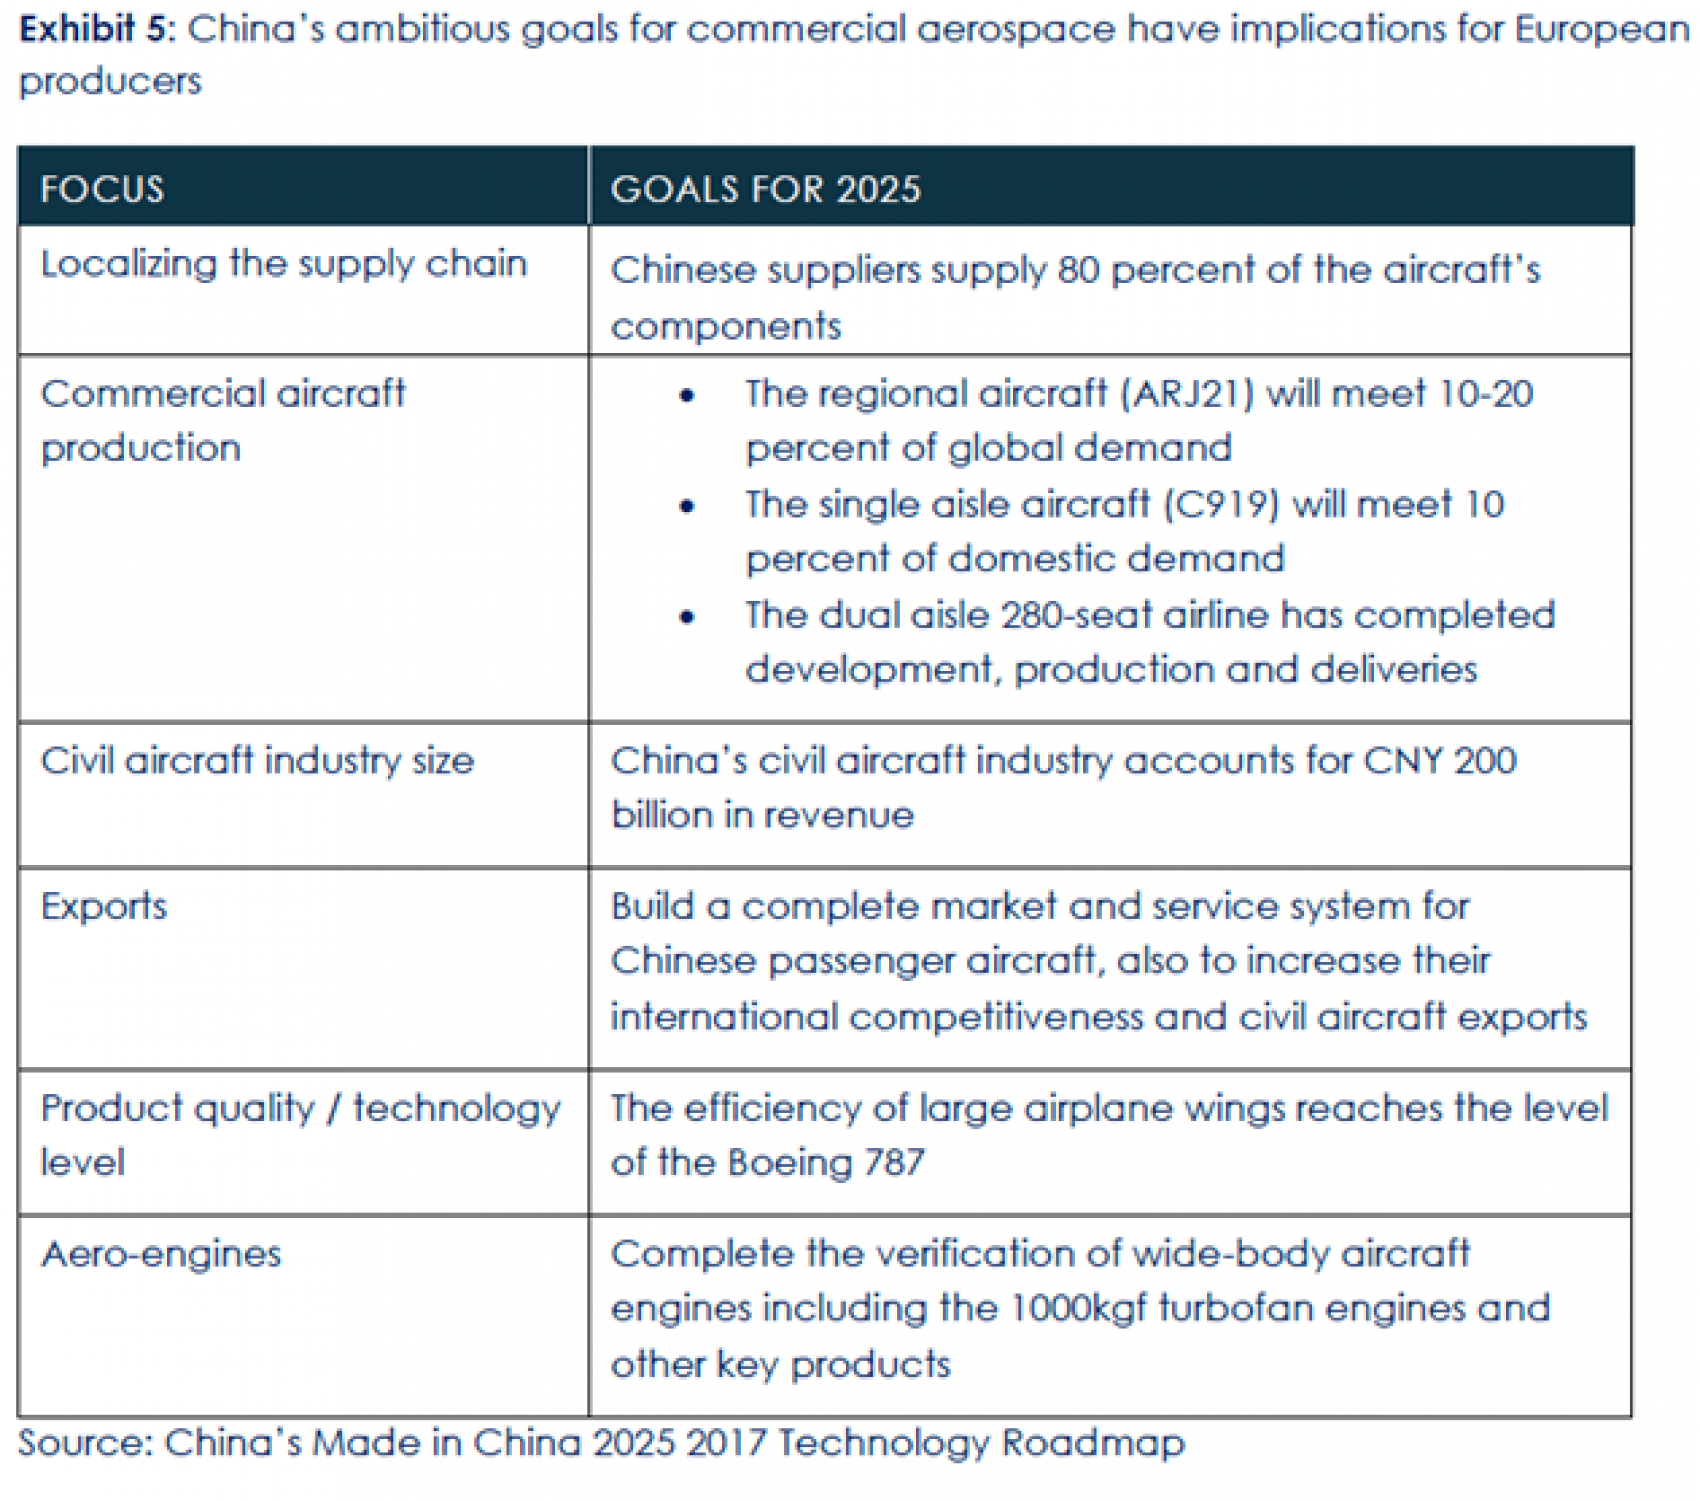 Exhibit 5: China's ambitious goals for commercial airspace 